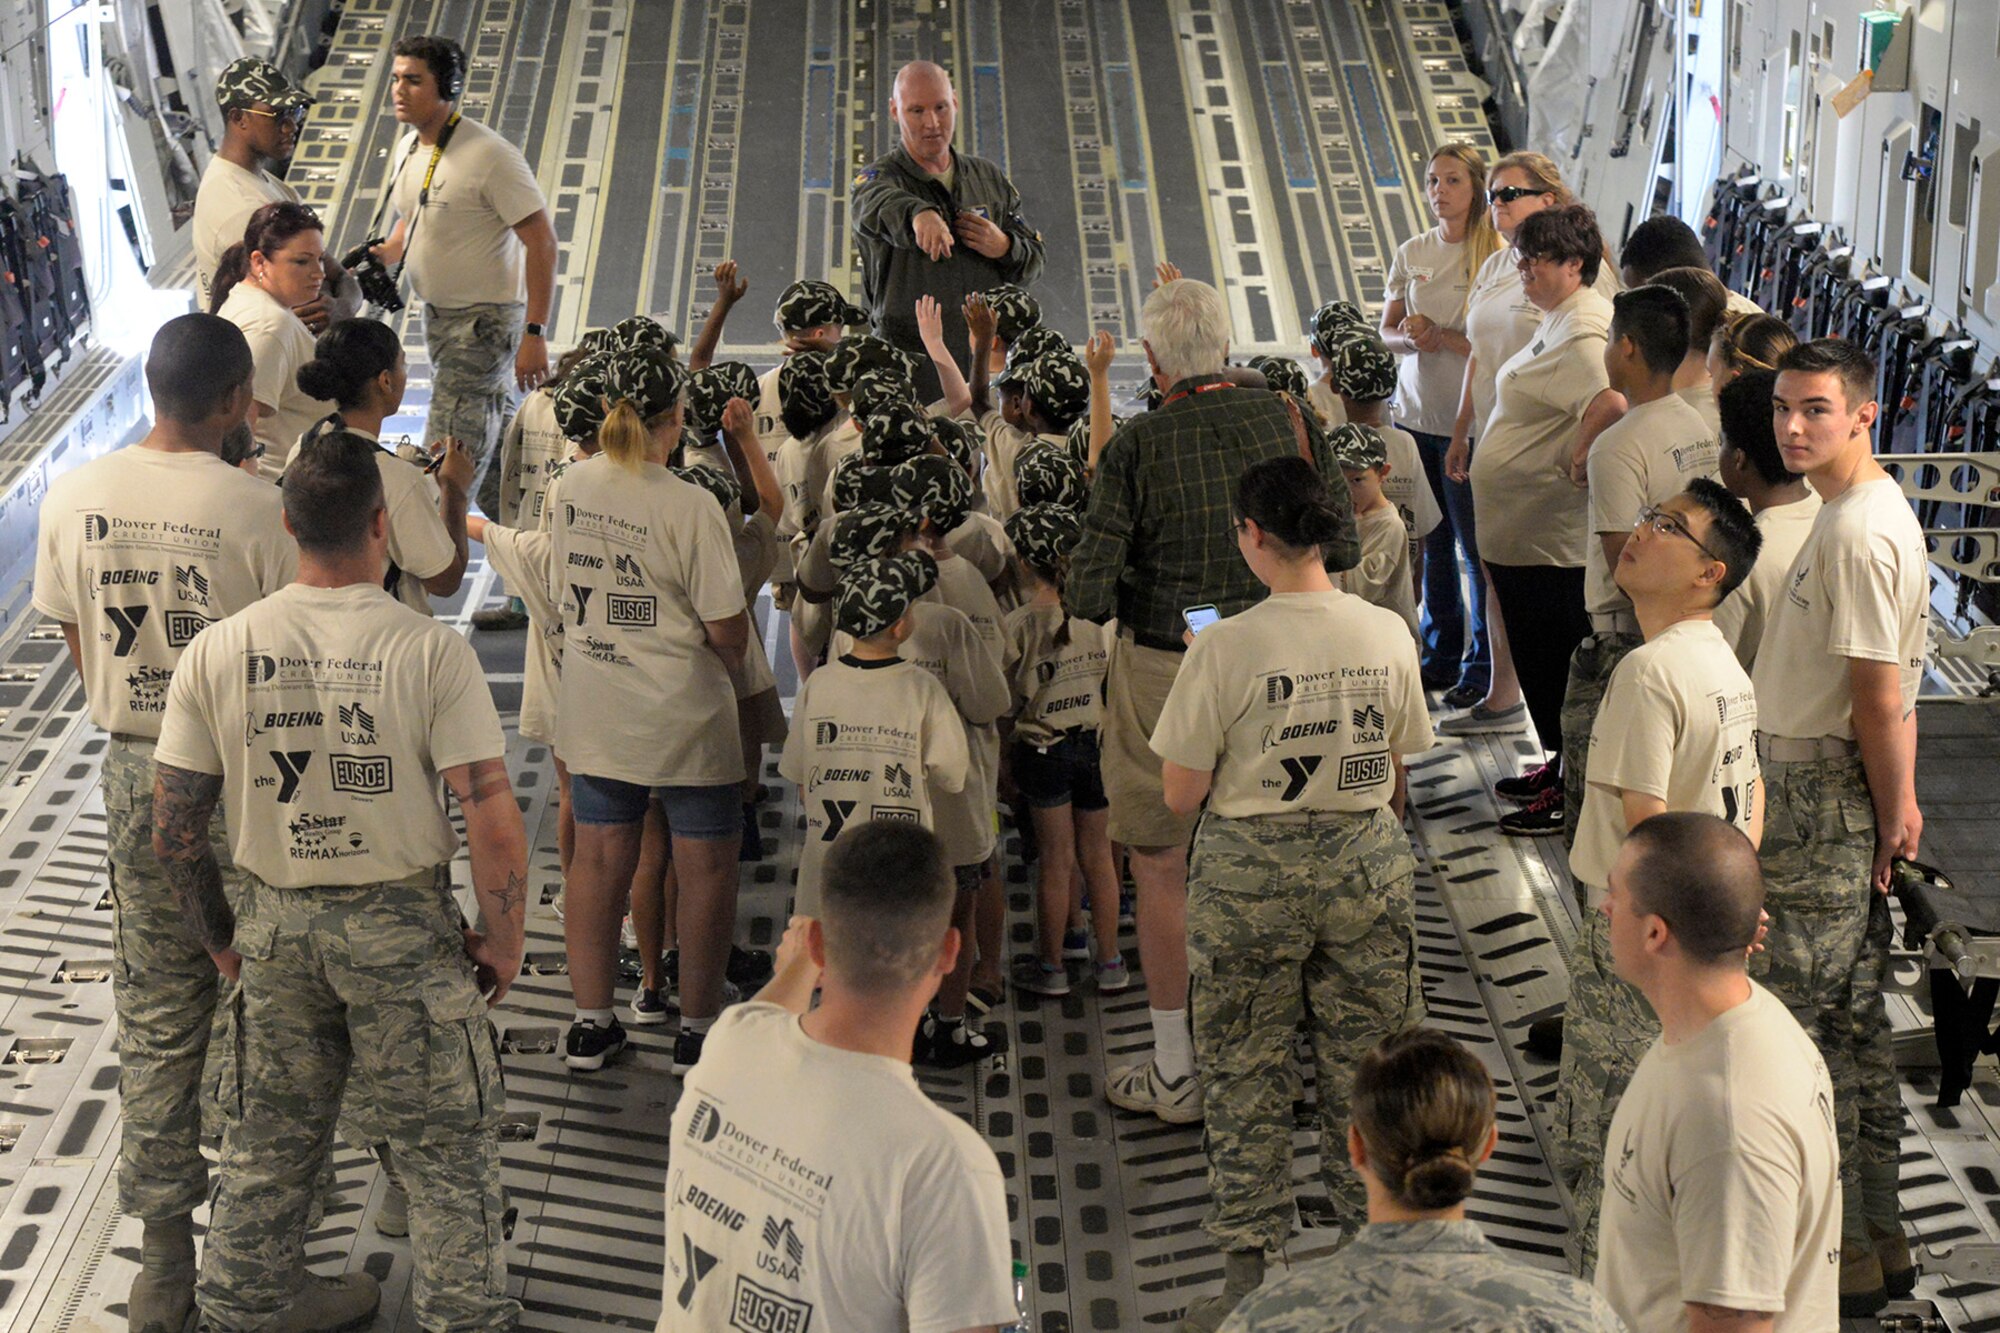 Tech. Sgt. Chris Koch, 3rd Airlift Squadron loadmaster, explains mobility operations to children aboard a static C-17 Globemaster III during a Kids/Teachers Understanding Deployment Operations event Aug. 9, 2018, at Dover Air Force Base, Del. Children and teachers got to see how mobility Airmen deploy around the world and what equipment is used to get them there. (U.S. Air Force photo by Tech. Sgt. Matt Davis)